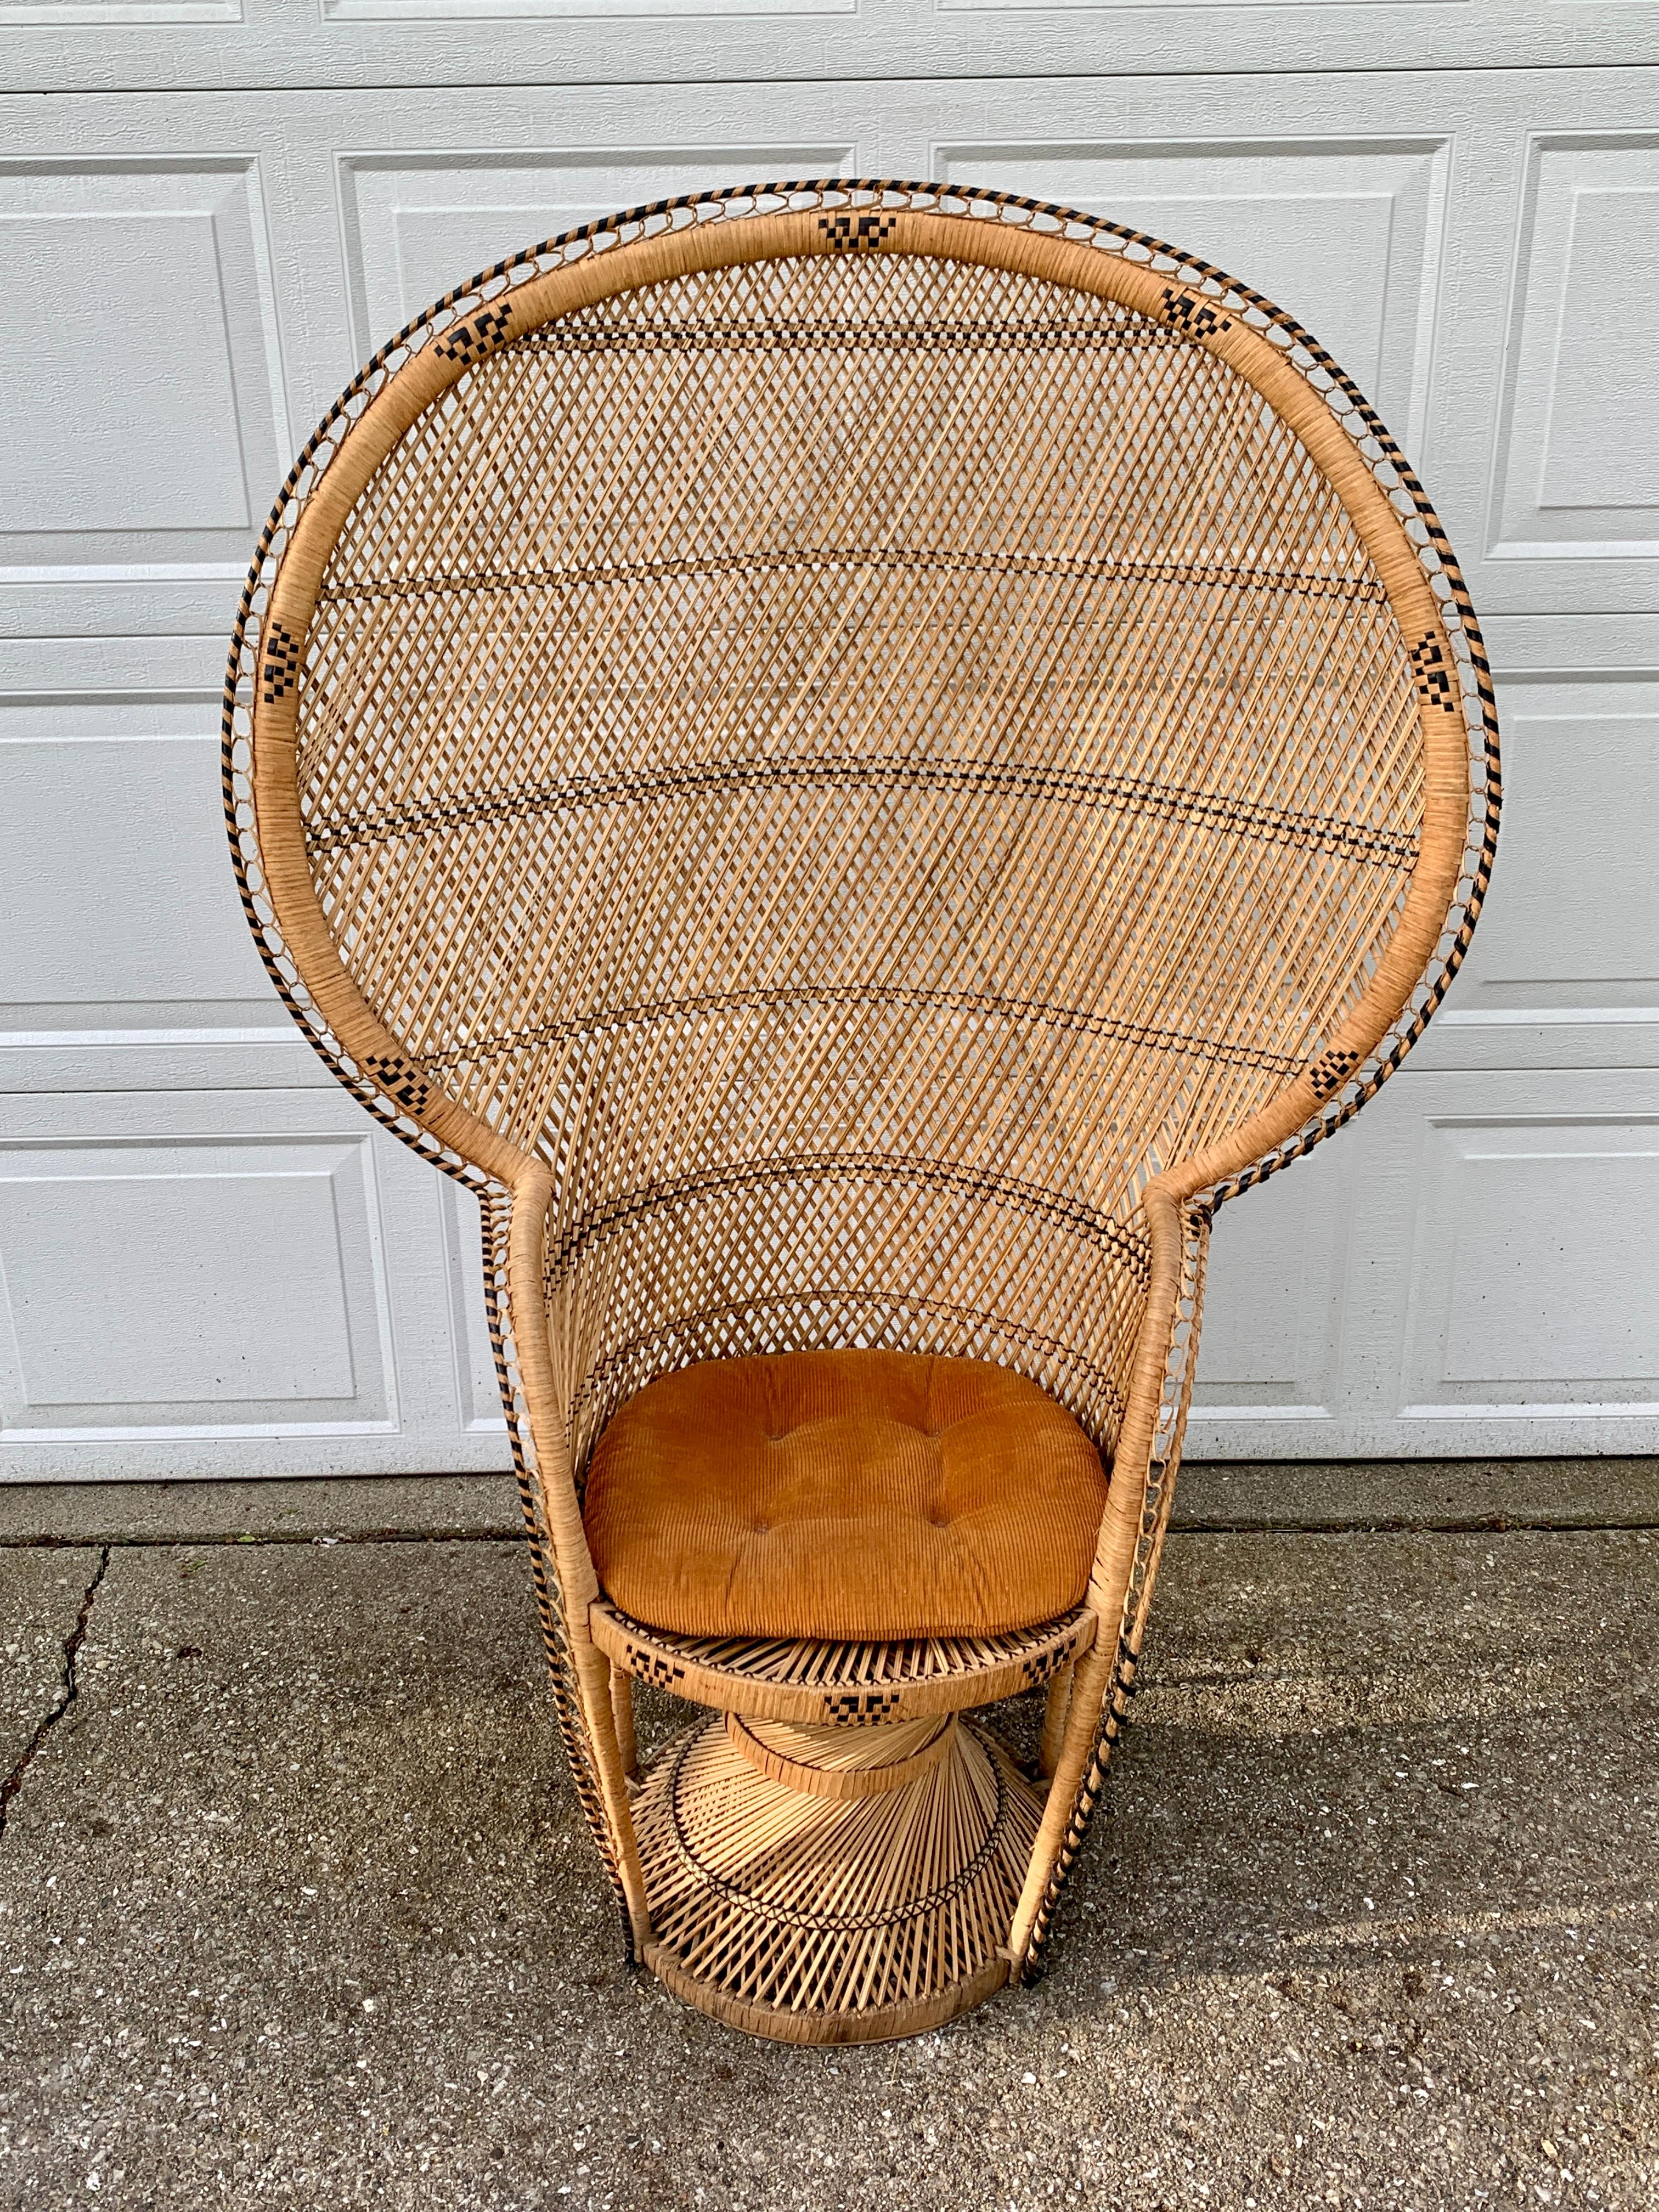 A gorgeous and iconic Mid-Century Modern Bohemian Emanuelle peacock chair??

circa 1970s??

Woven rattan and wicker, with a large scale fan back.??

Measures: 40.5”W x 20”D x 59.75”H. Seat height 17.5